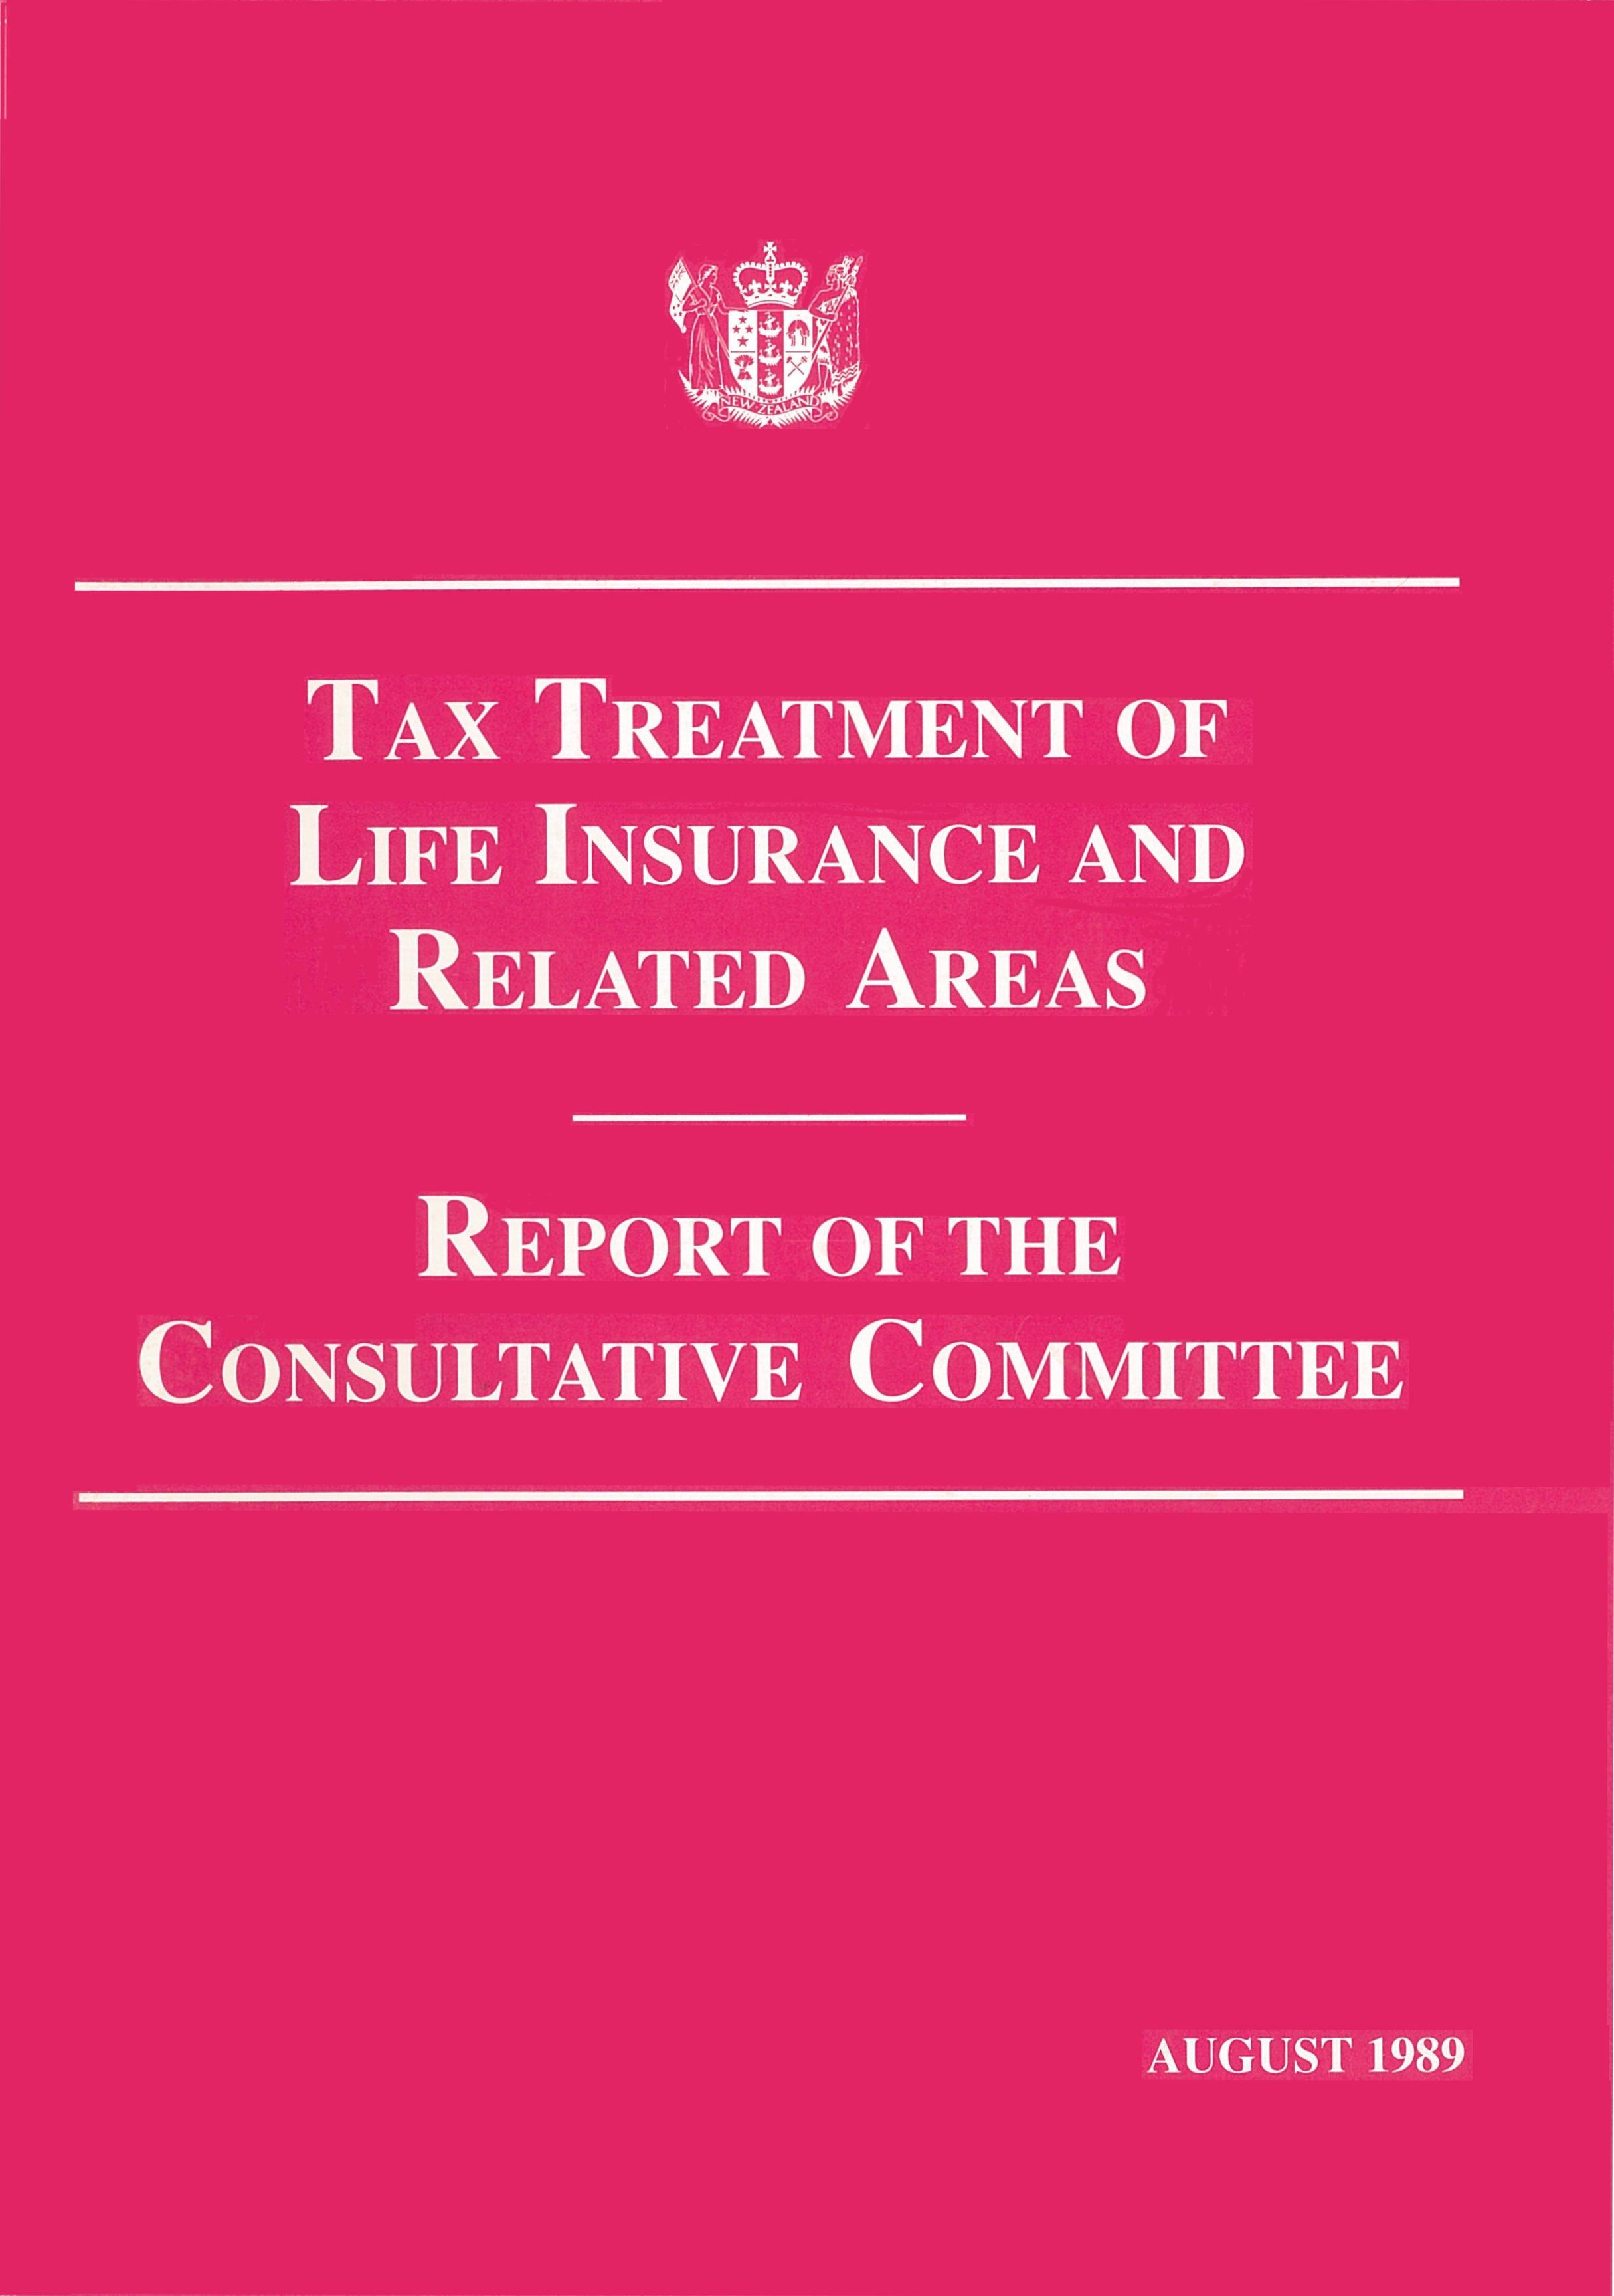 Publication cover with New Zealand coat of arms, Title: Tax treatment of life insurance and related areas – report of the Consultative Committee, Publication date - August 1989